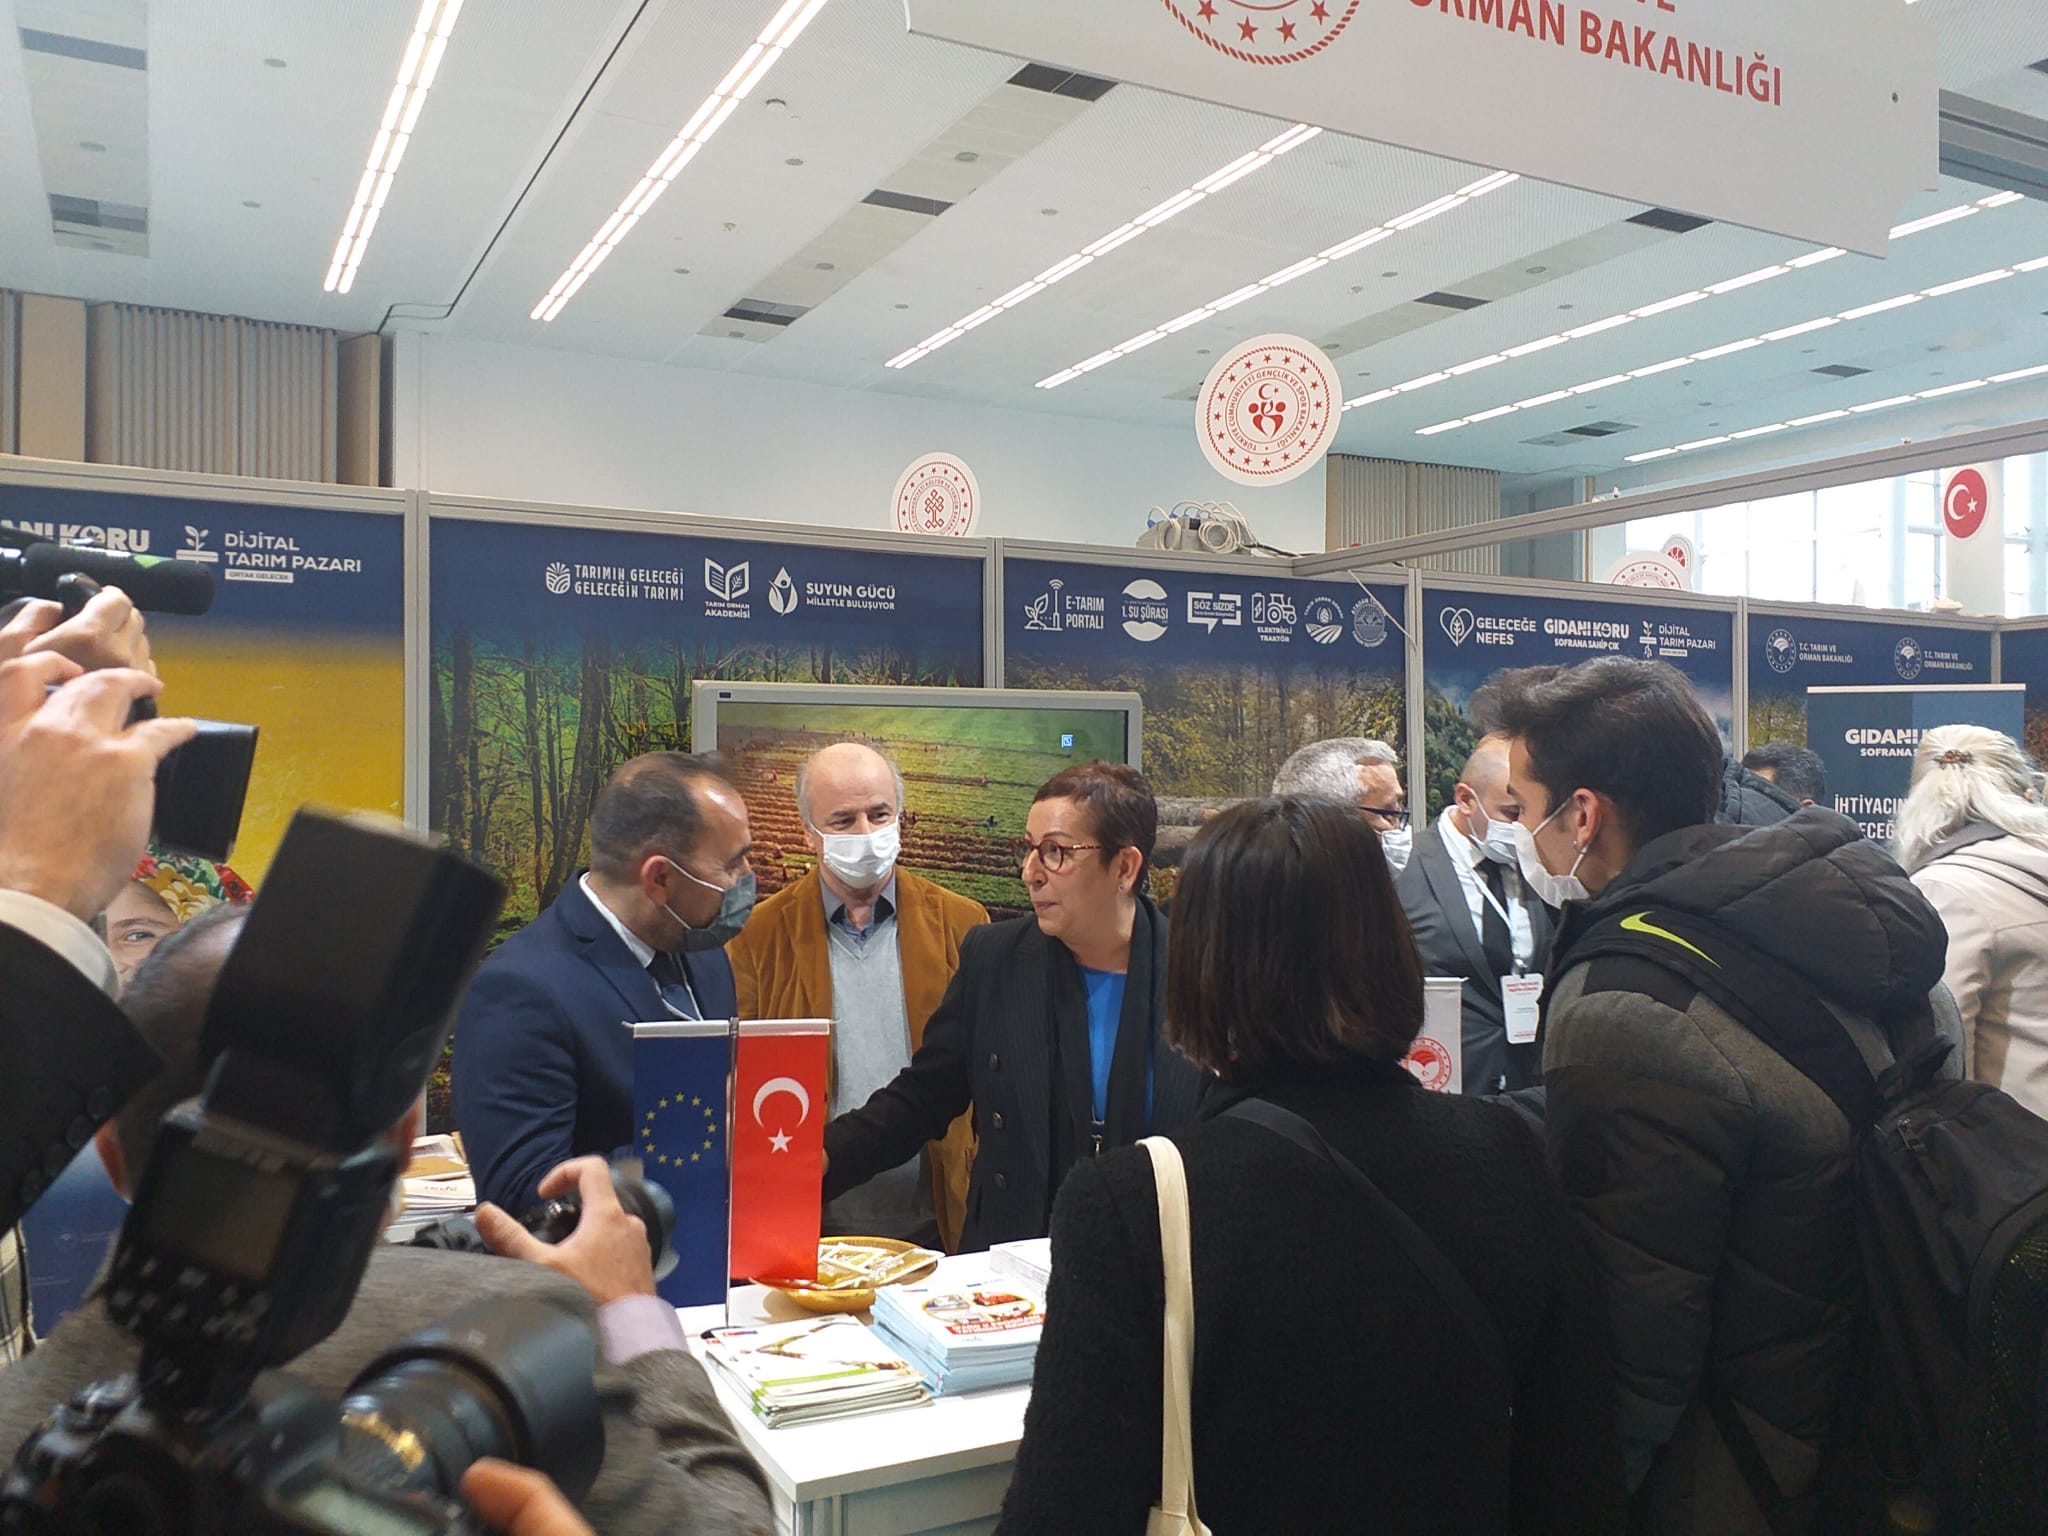 PARTICIPATION WAS REALIZED IN THE “STATE’S INCENTIVES PROMOTION DAYS” FAIR ORGANIZED BY THE T.R. DIRECTORATE OF COMMUNICATIONS OF TURKISH PRESIDENCY B